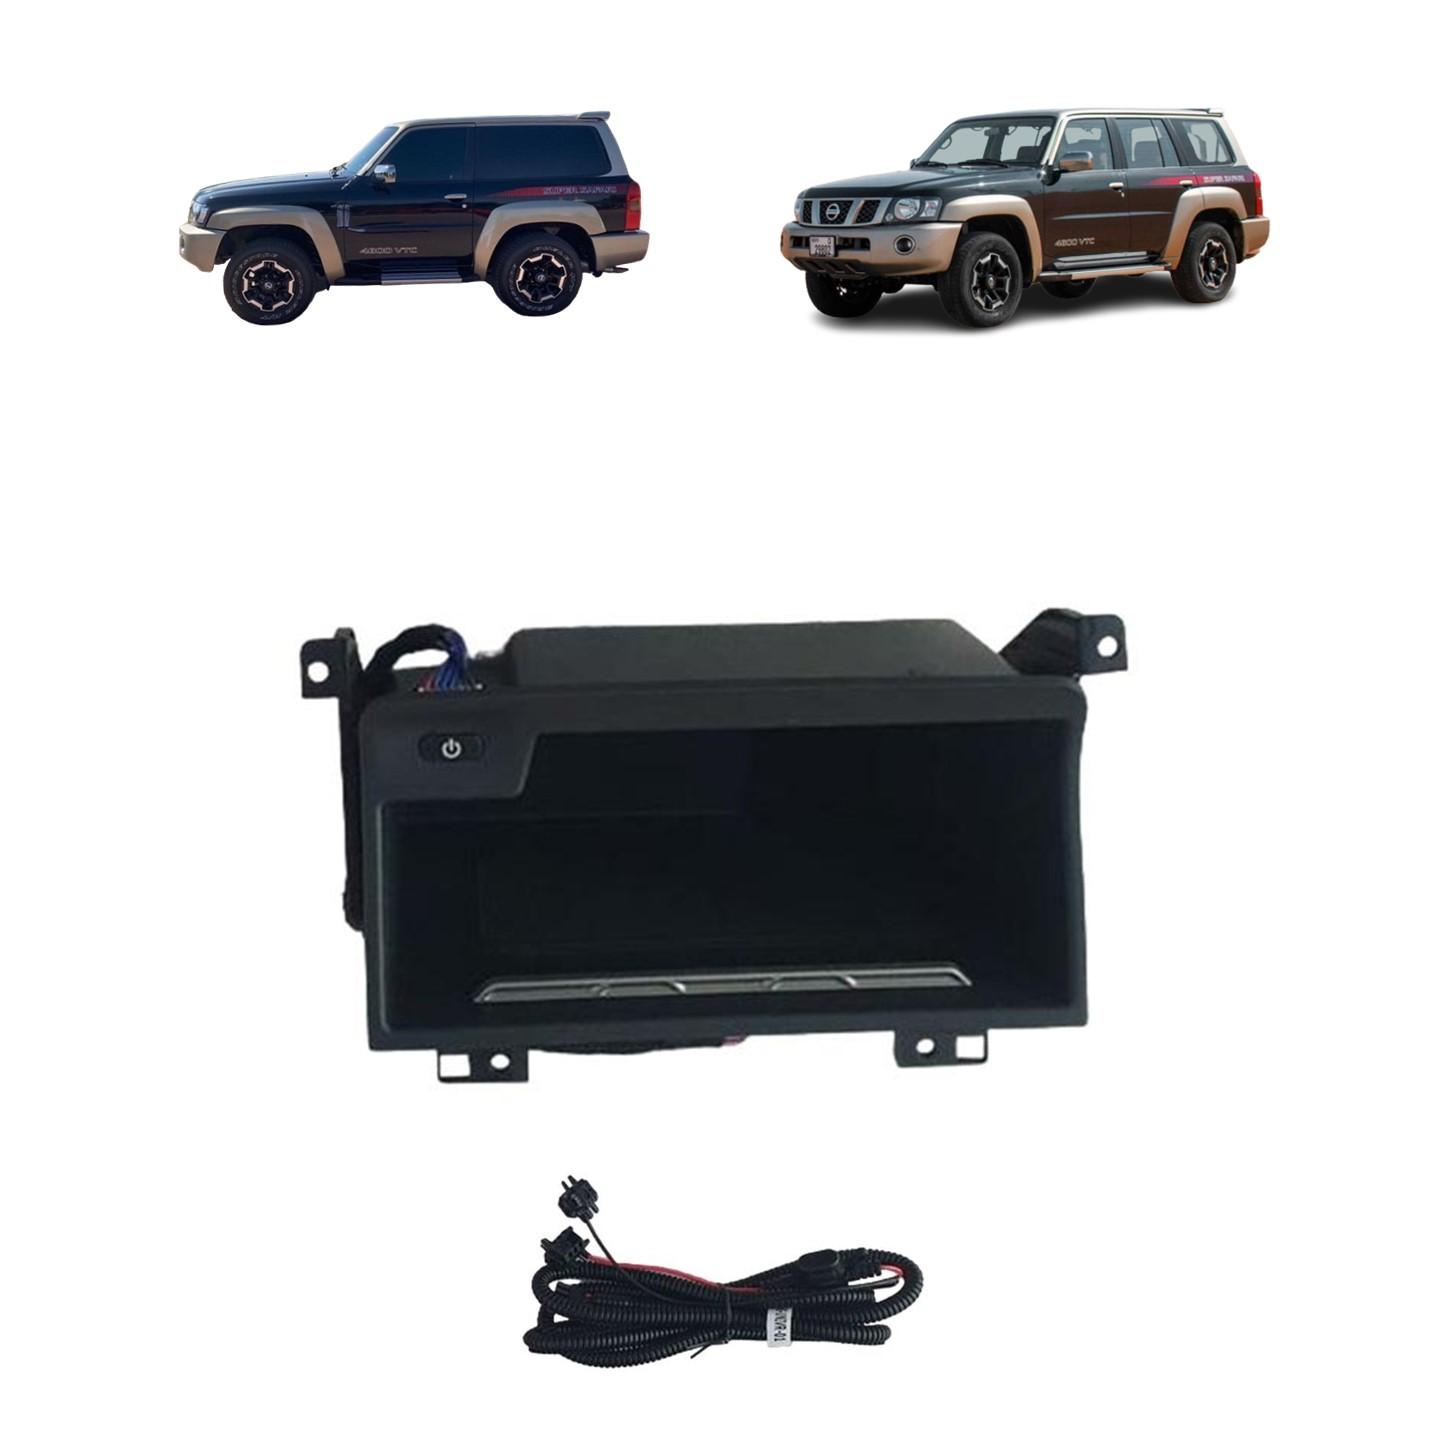 Integrated Wireless Mobile Charger Nissan Patrol Y61 VTC GU